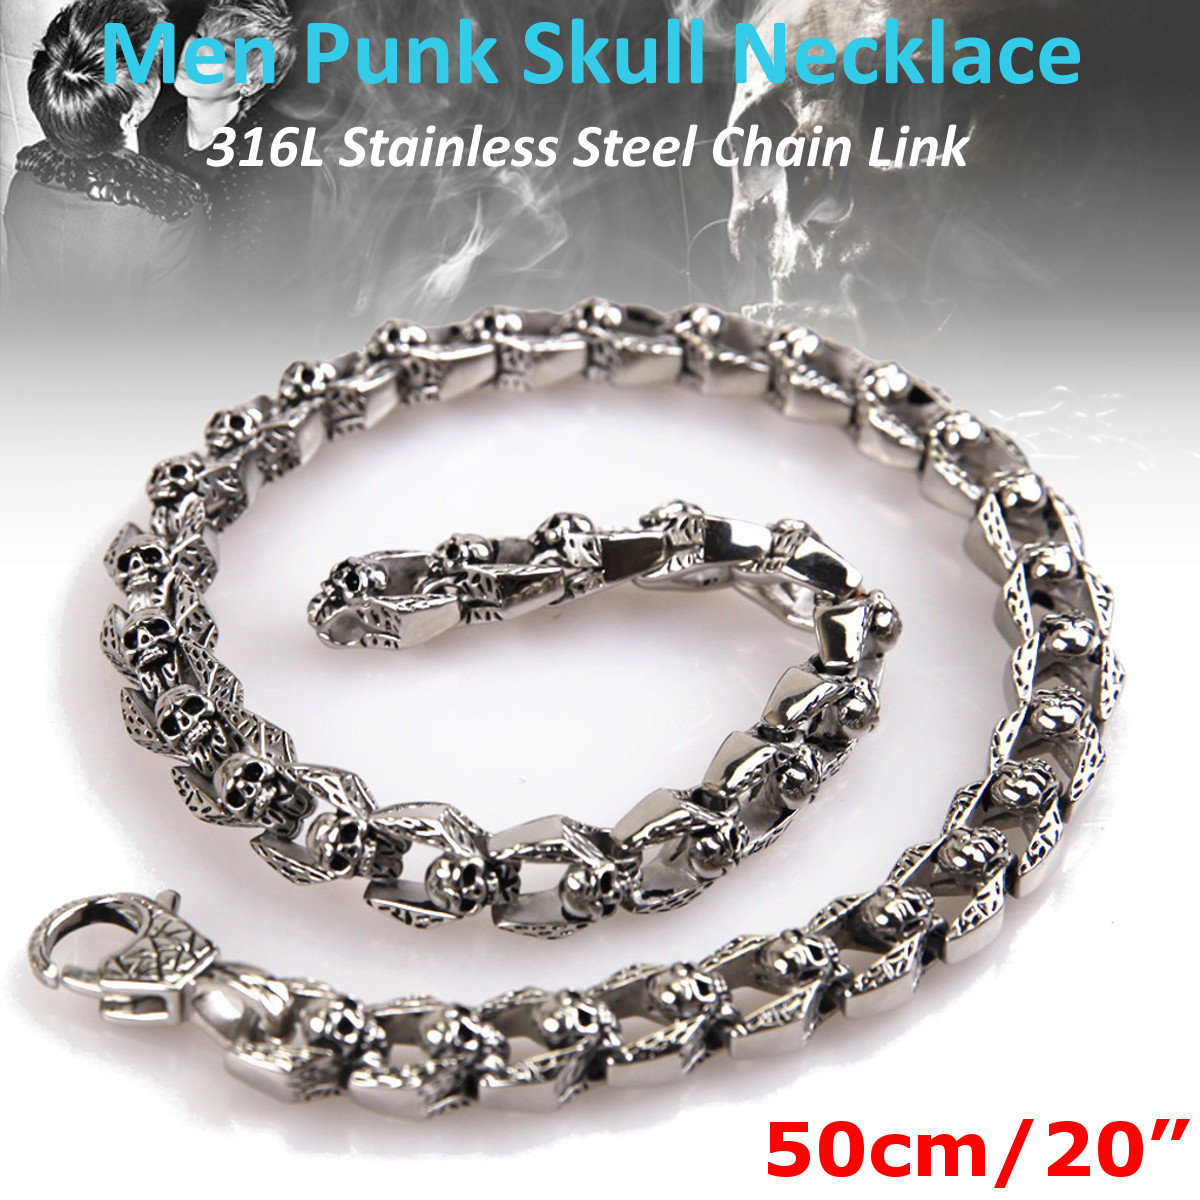 Men's Heavy Vintage Gothic Skulls Chain Link Stainless Steel Necklace 20" 147g 